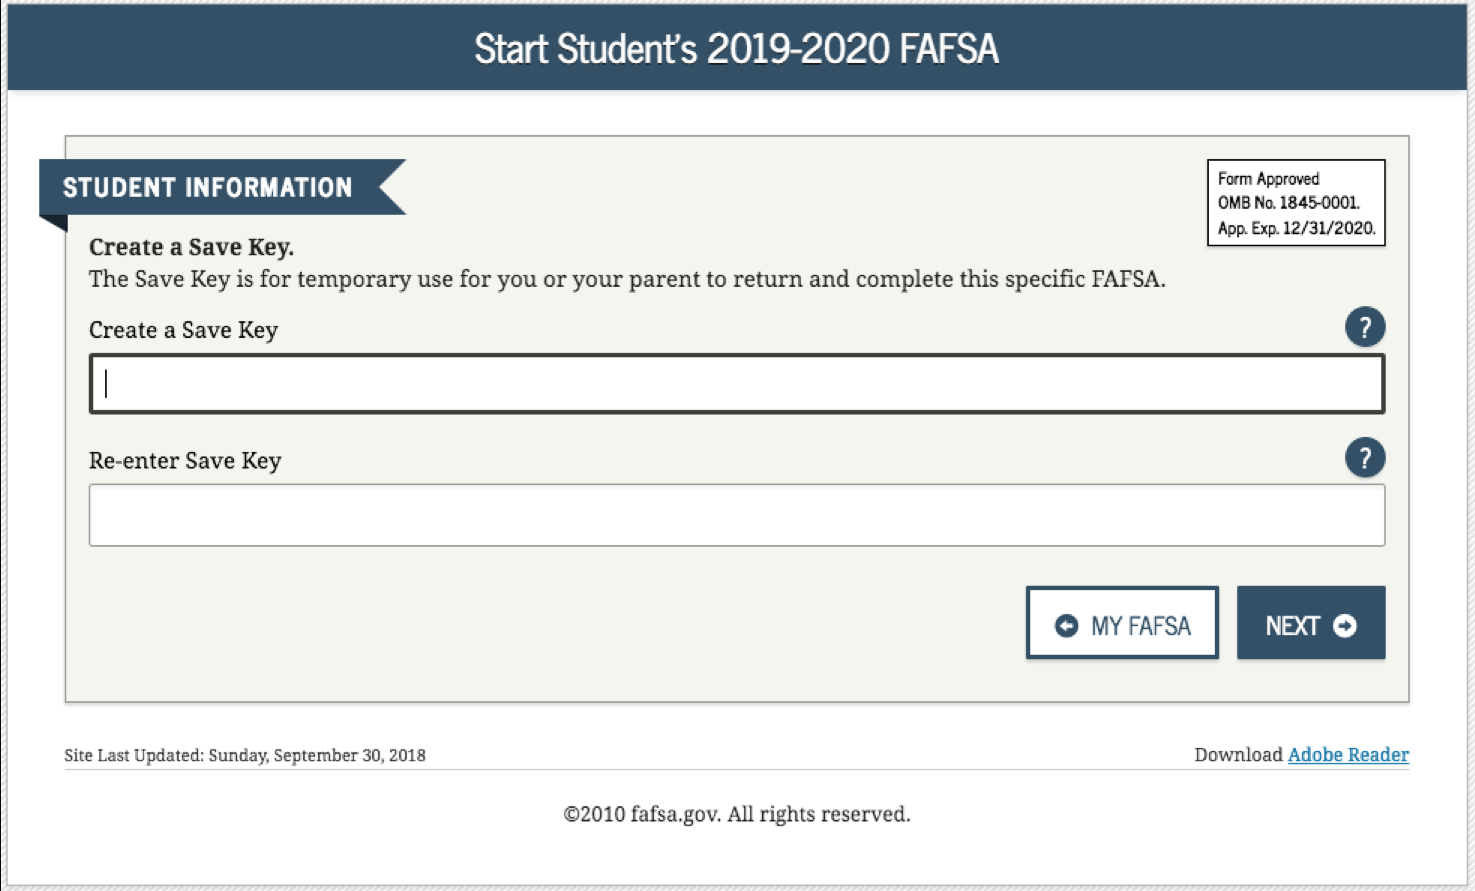 How To Complete The 2019-2020 Fafsa Application - Free Printable Fafsa Application Form